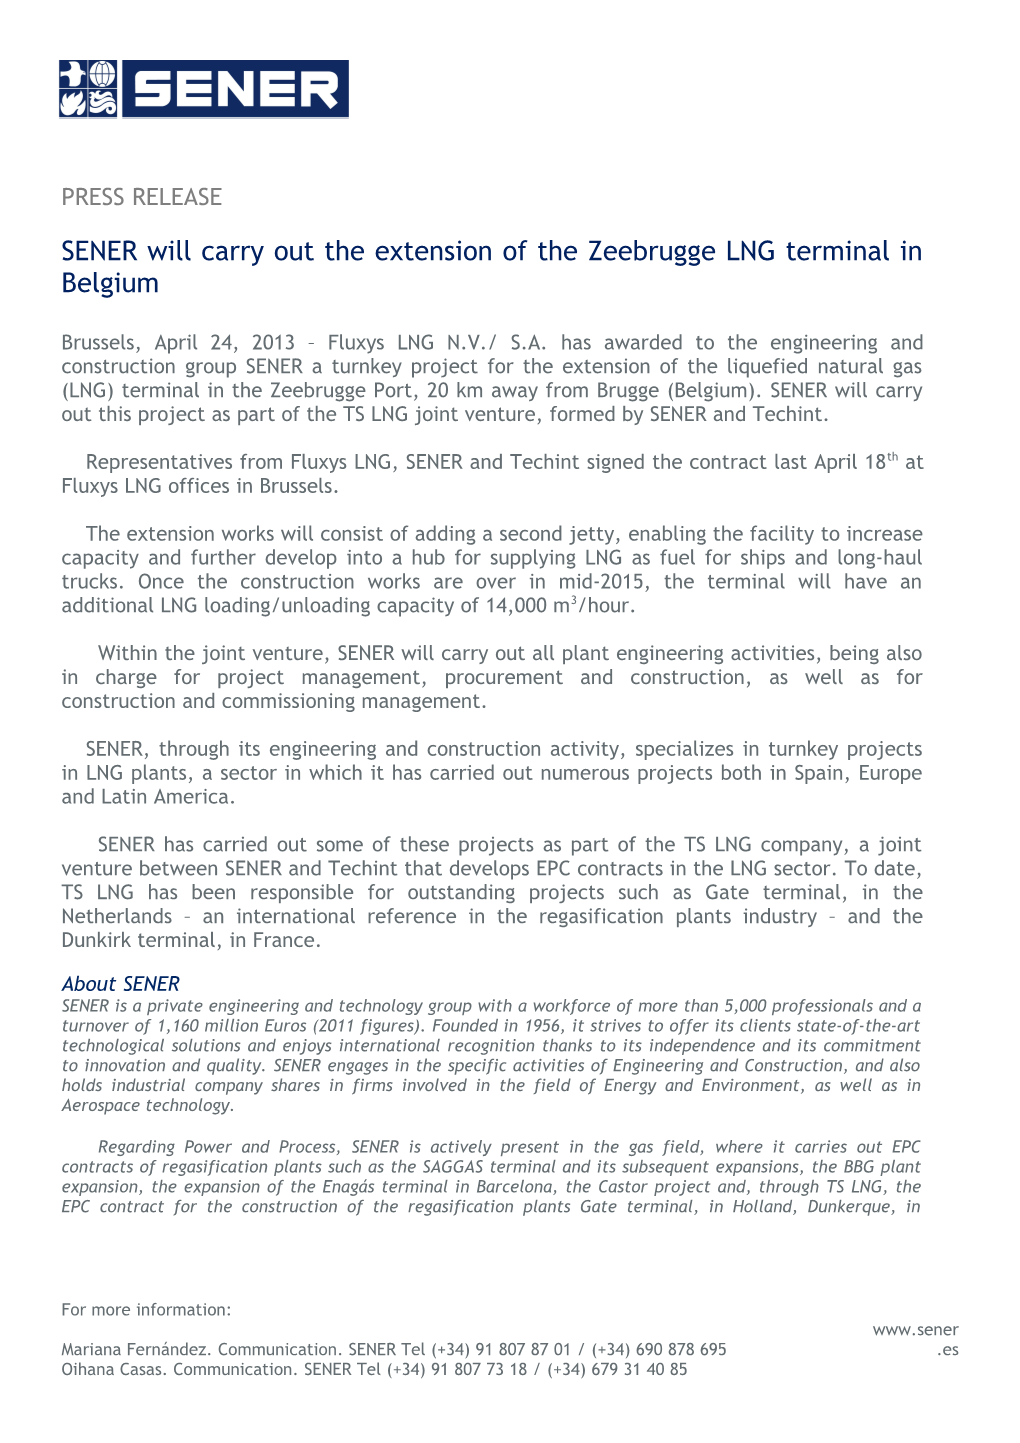 SENER Will Carry out the Extension of the Zeebrugge LNG Terminal in Belgium